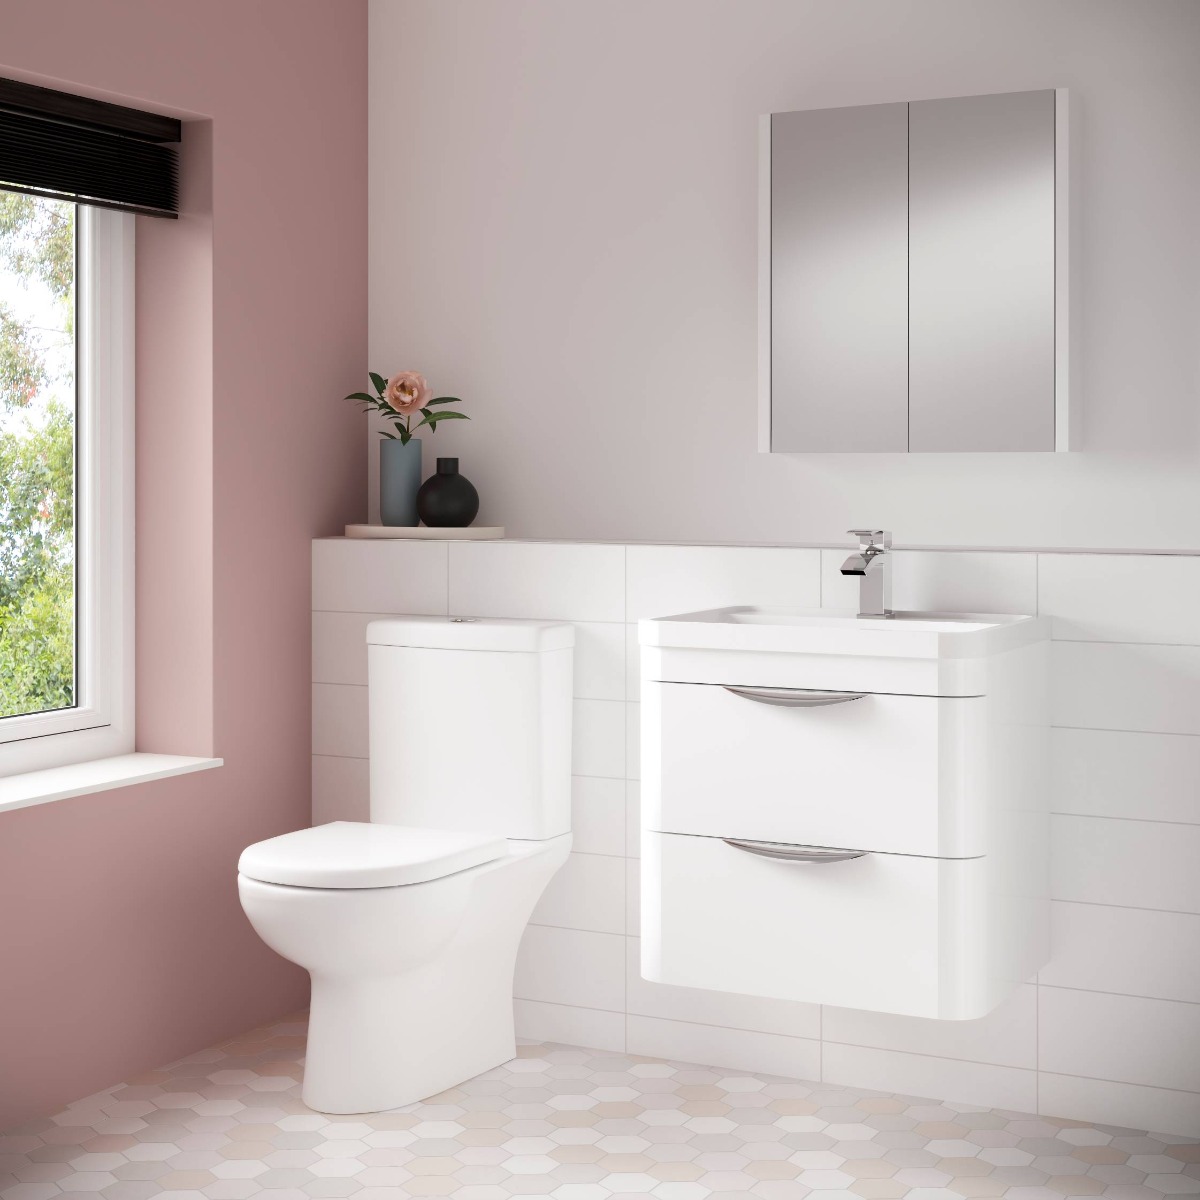 white furniture in pink bathroom